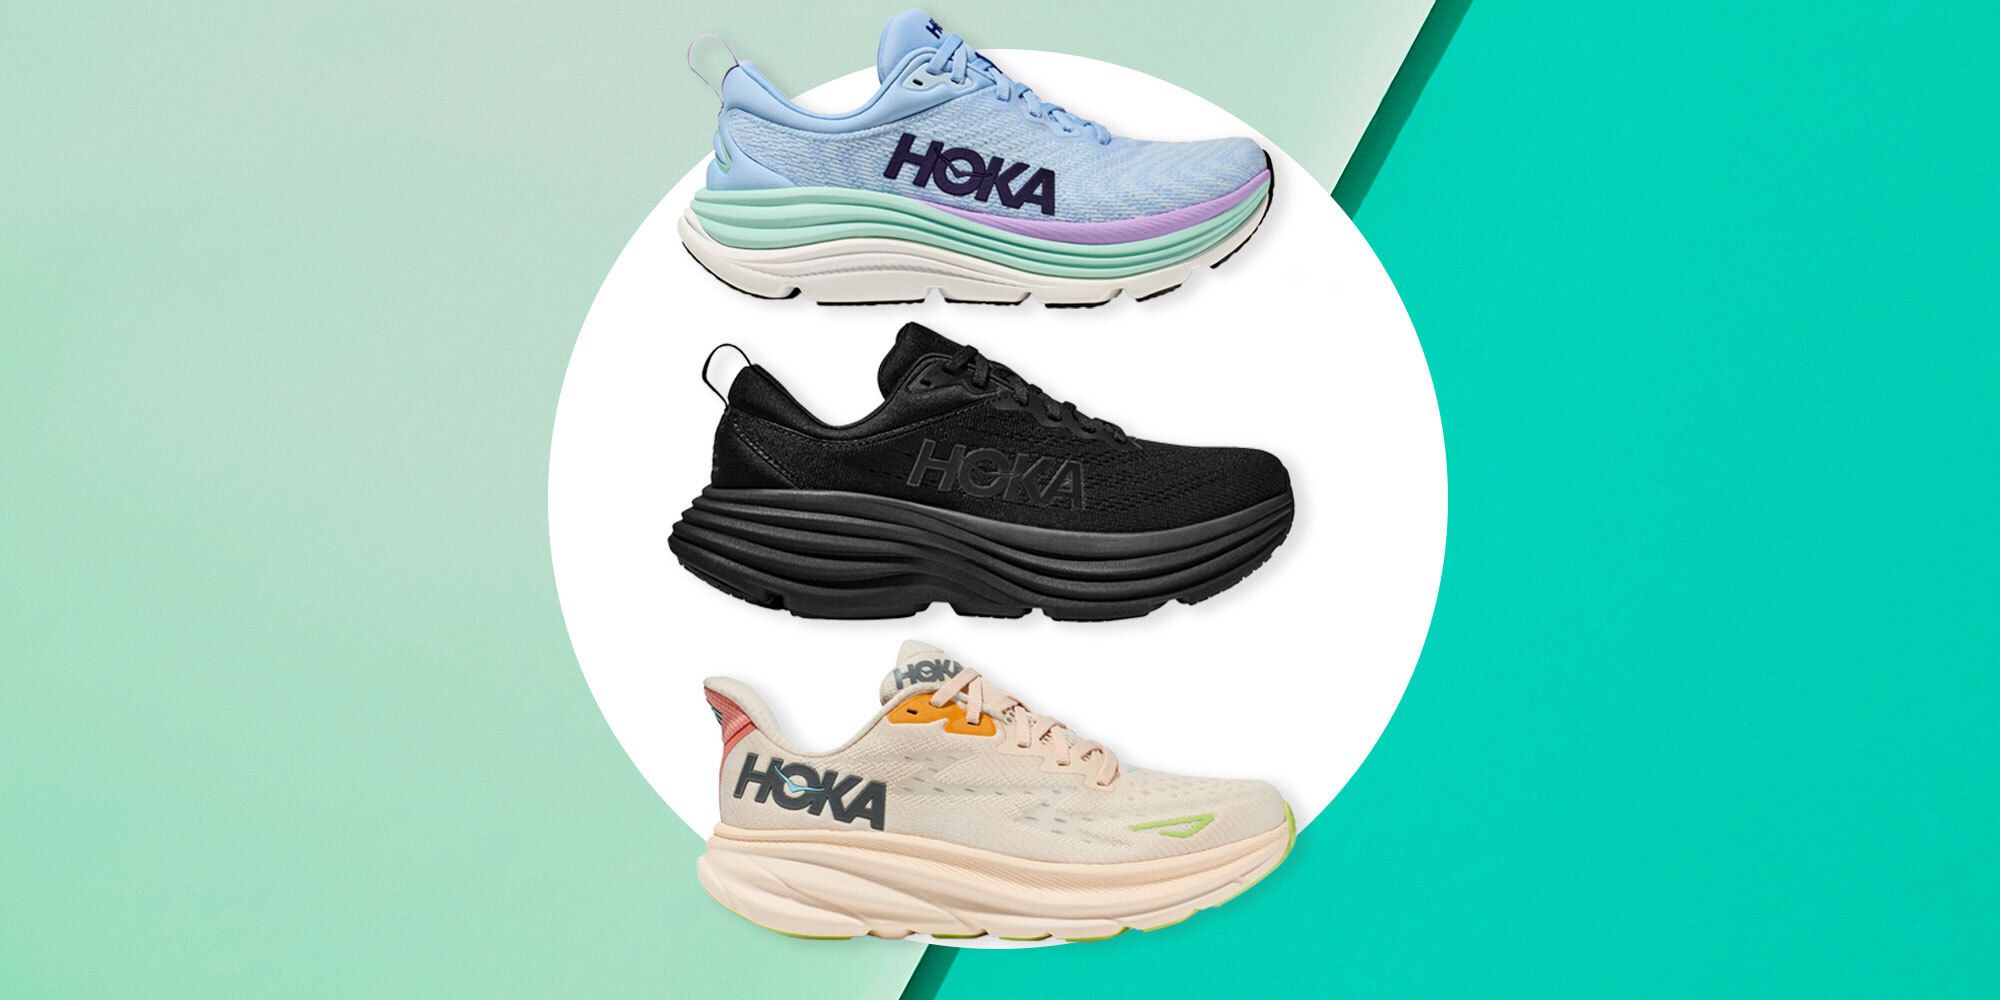 <p>Our love for Hoka knows no bounds. After all, the King of Cushion makes incredibly chunky and stylish <a href="https://www.womenshealthmag.com/fitness/g46041761/best-running-shoes-women/">running sneakers</a> that feel like you're walking on Cloud Nine. According to the experts we spoke with, Hoka's thick cushioning also makes it an ideal brand for <a href="https://www.womenshealthmag.com/fitness/g23517576/best-walking-shoes-for-women/">walking shoes</a>. “Hoka walking sneakers are great because they offer an appropriate amount of support, stability, and comfort,” says podiatrist <a href="https://www.instagram.com/doctor.bradley/?hl=en">Brad Schaeffer, DPM</a>, foot surgeon and owner of Central Park Sole in New York City.</p><p>Since the brand launched in 2009, Hoka has churned out a bunch of great styles purpose built for all sorts of activities—from road running to hiking, and everything in between. All those models can get pretty overwhelming if you're looking for a great walking shoe. But that's why we enlisted the help of Schaeffer; <a href="https://www.progressivefootcareny.com/dr-bruce-pinker-biography/">Bruce Pinker, DPM</a>, foot and ankle surgeon; as well as our intrepid <em>WH</em> editors, on the right walking sneaks for you. </p><h2>Best Hoka Walking Shoes </h2><h2>What to Consider </h2><h3>Stability </h3><p>“I like to advise my patience to get a neutral walking shoe,” says Schaeffer. A neutral walking shoe puts your foot in a neutral position, according to the podiatrist. “As in you are not over prating or over supinating,” says Schaeffer. Ideally, you want the <a href="https://www.womenshealthmag.com/life/g38216685/best-insoles/">insole</a> of your <a href="https://www.womenshealthmag.com/fitness/g45599116/best-hoka-running-shoes/">Hoka running shoe</a> to meet the arch of your foot, without pushing it too high or letting it collapse inward. If the arch is too high, it will force your foot to roll outwards (along the pinky-toe side) as you walk a.k.a over supinate. On the flip side, an arch that is too low will cause your foot to roll inwards a.k.a over pronate. </p><h3>Comfort</h3><p>A typical Hoka <a href="https://www.womenshealthmag.com/fitness/a43740579/best-sneakers-2023/">sneaker</a> has a combination of thick cushioning and mesh upper, making it incredibly comfortable. The breathable upper makes sure that any foot sweat has room to evaporate, which is especially useful for those hot weather walks. Meanwhile, a cushioned outsole keeps your feet comfortable as you walk. </p><p>Plus, Schaeffer says that several pairs of Hoka shoes feature a “rocker bottom," which refers to a little lift under the heel and the toe so that those two parts of the shoe don’t touch the ground when you’re standing still–similar to the base of a rocking chair. That shape helps you to walk from heel-to-toe, which means you excert less energy to propel your strides. After all, we could use a little help getting out steps in.</p><p class="body-tip"><strong>Meet the experts: </strong><a href="https://www.instagram.com/doctor.bradley/?hl=en">Brad Schaeffer, DPM</a>, is a podiatrist, foot surgeon, and owner of Central Park Sole in New York City. <a href="https://www.progressivefootcareny.com/dr-bruce-pinker-biography/">Bruce Pinker, DPM</a>, is a podiatrist and foot surgeon at Progressive Foot Care in Westchester, NY.</p><h2>How we selected</h2><p>Everyone’s feet is different, so, we’ve curated this list of the best Hoka walking shoes from editors and personal trainers–that fall in line with Schaeffer's recommendation on what to consider in a walking shoe. Our team reviewed each Hoka model's cushioning, stability, and style, and just how comfortable it felt while walking in it. Every pick on this list was vetted by Schaeffer. Read on for our list of the best Hoka walking shoes. </p>